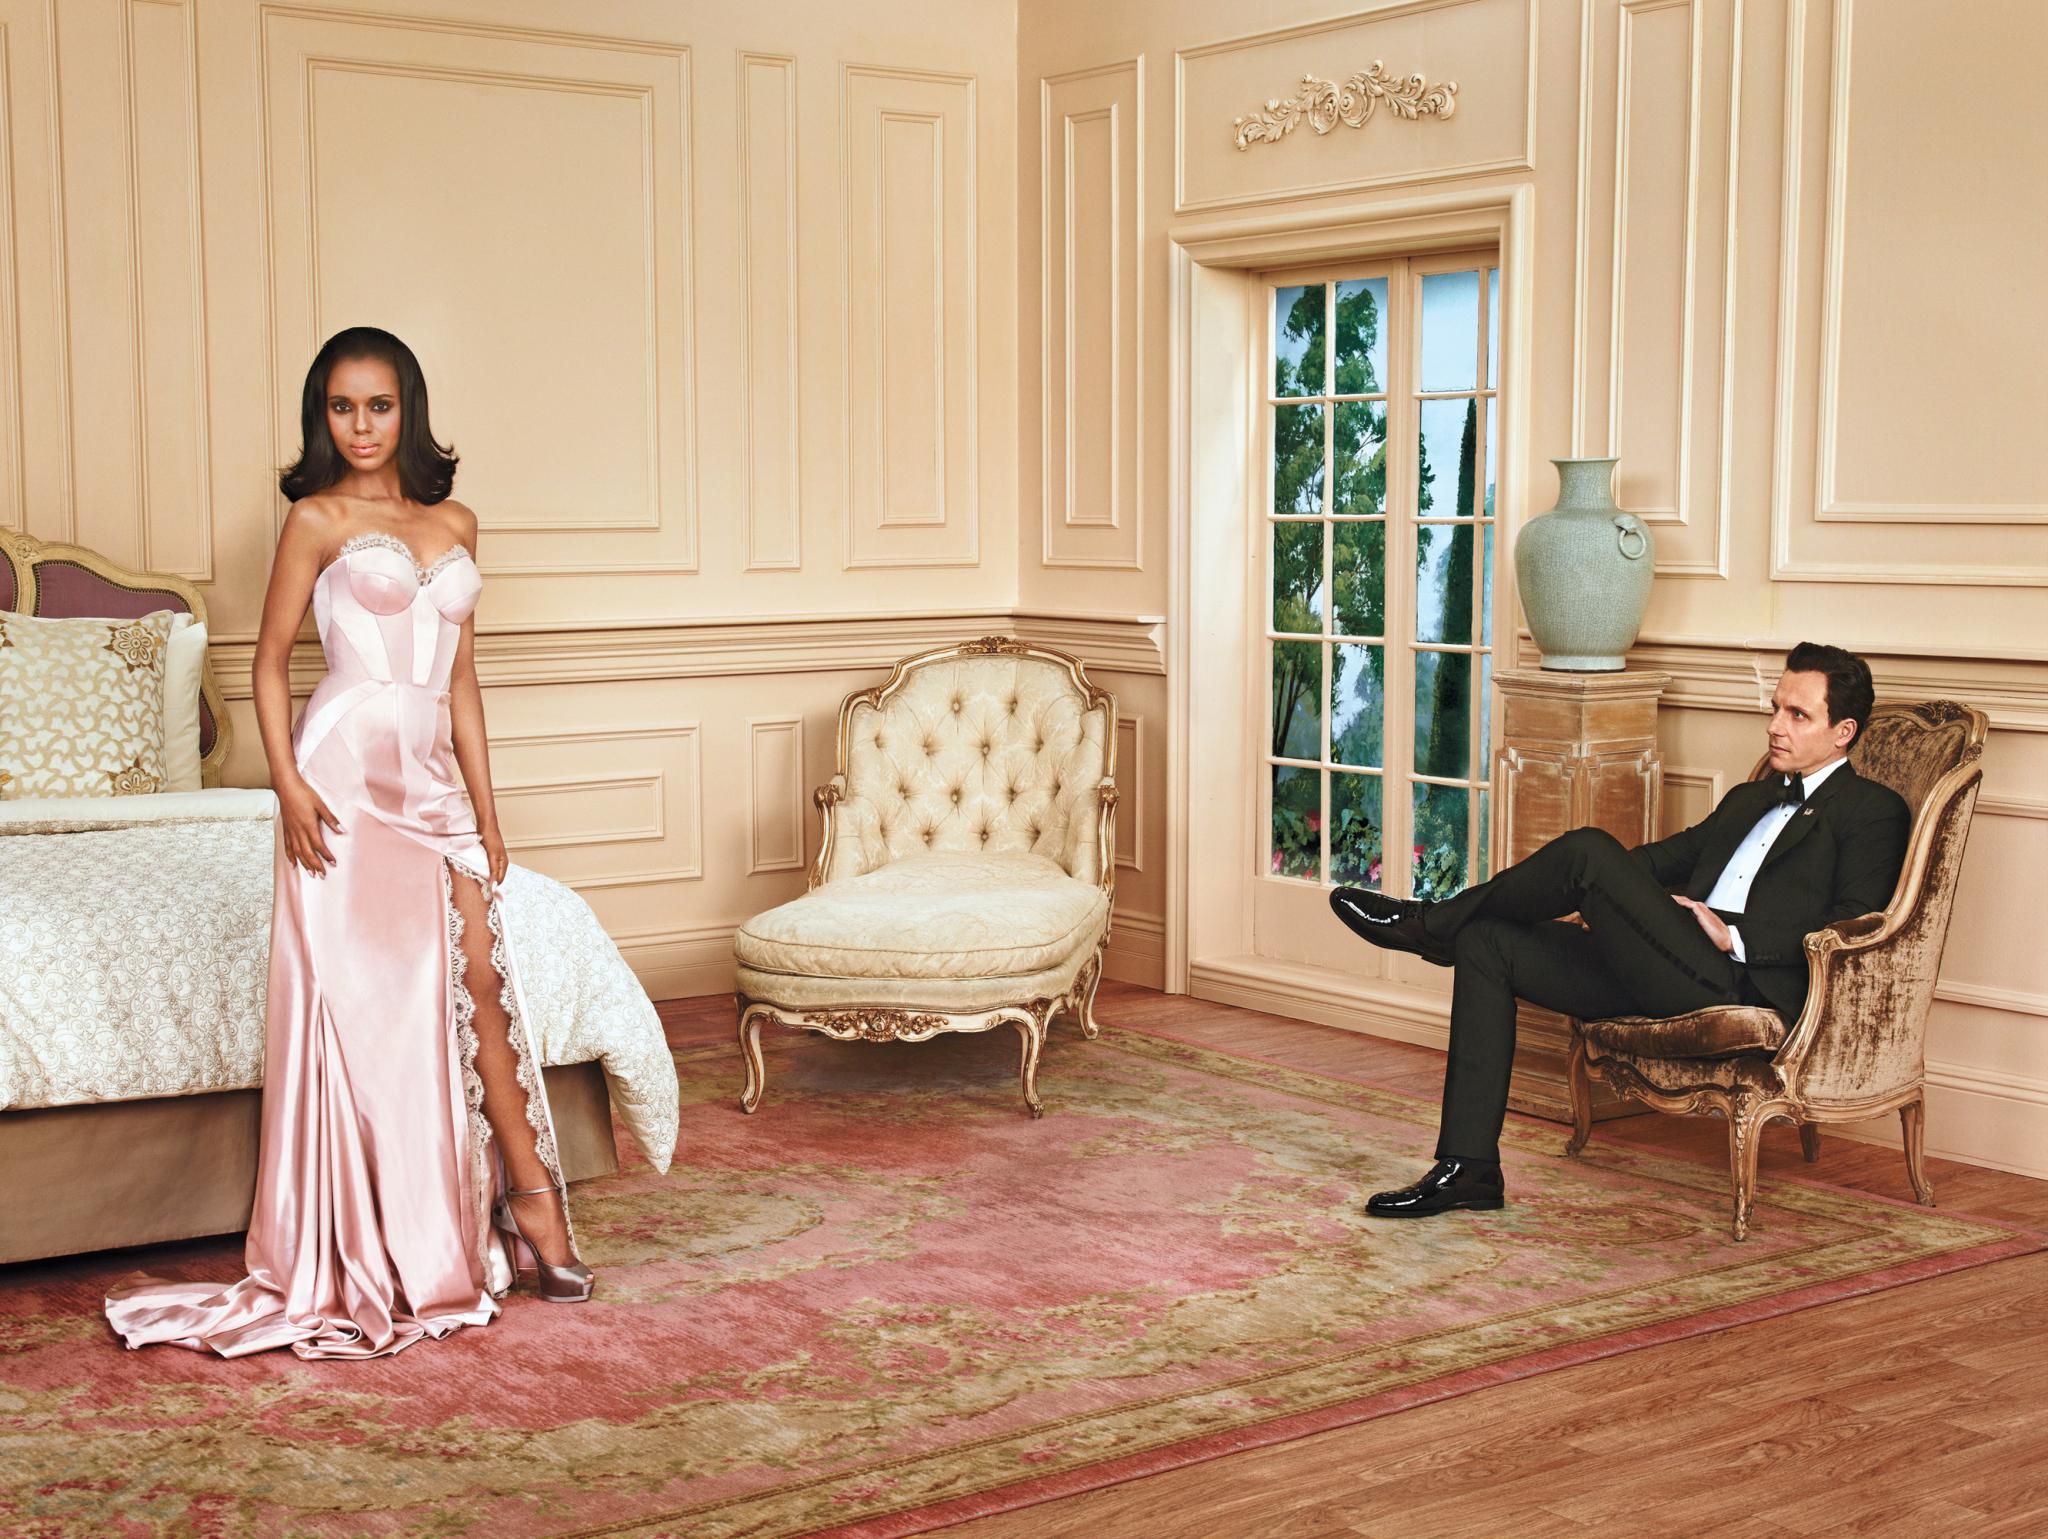 EXCLUSIVE PHOTO: 'Scandal' Stars Get Steamy
